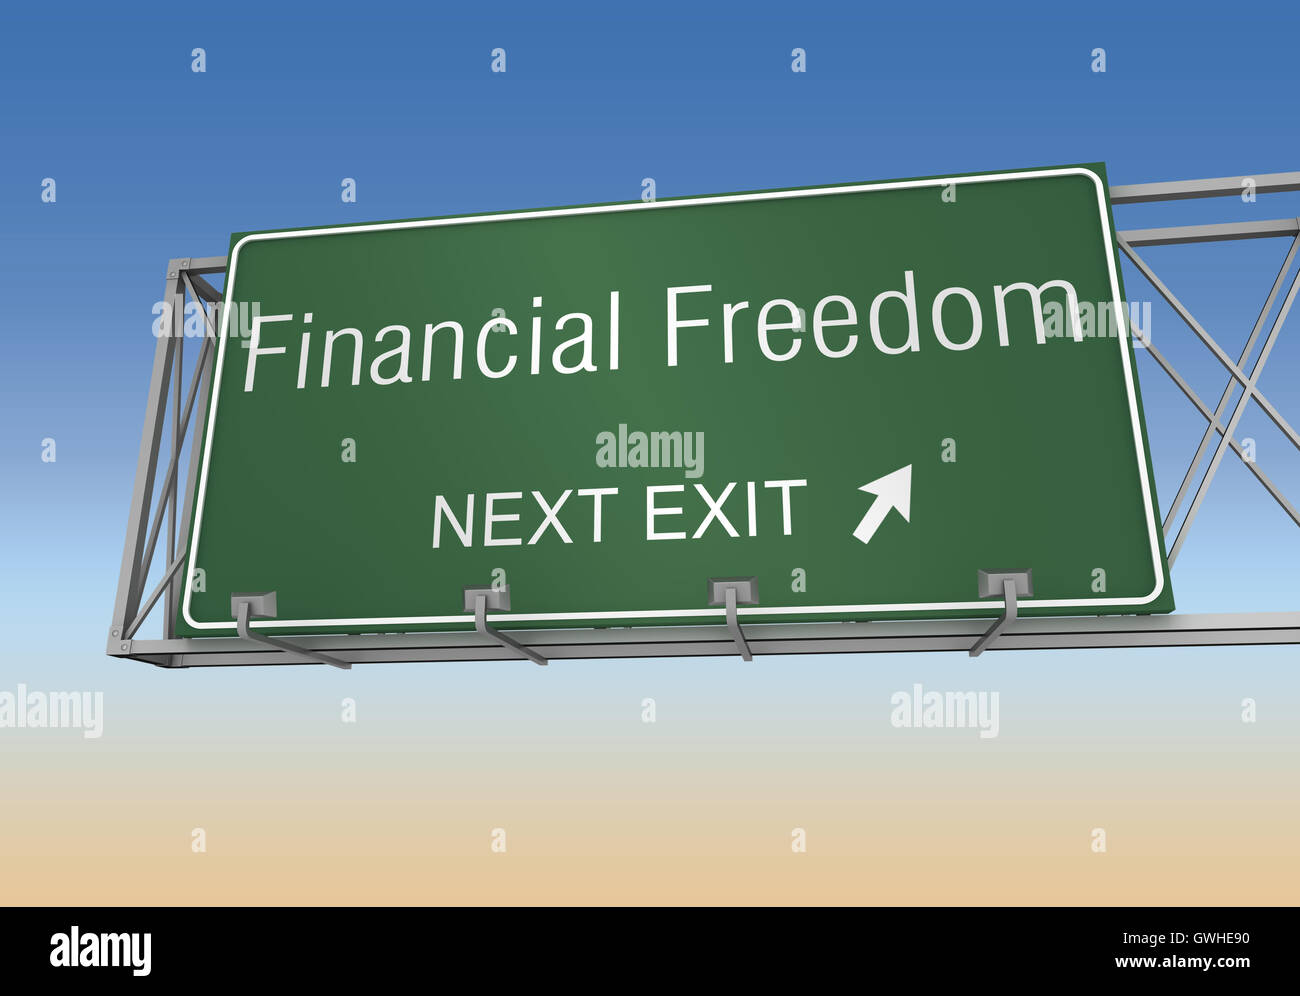 financial freedom road sign 3d illustration Stock Photo